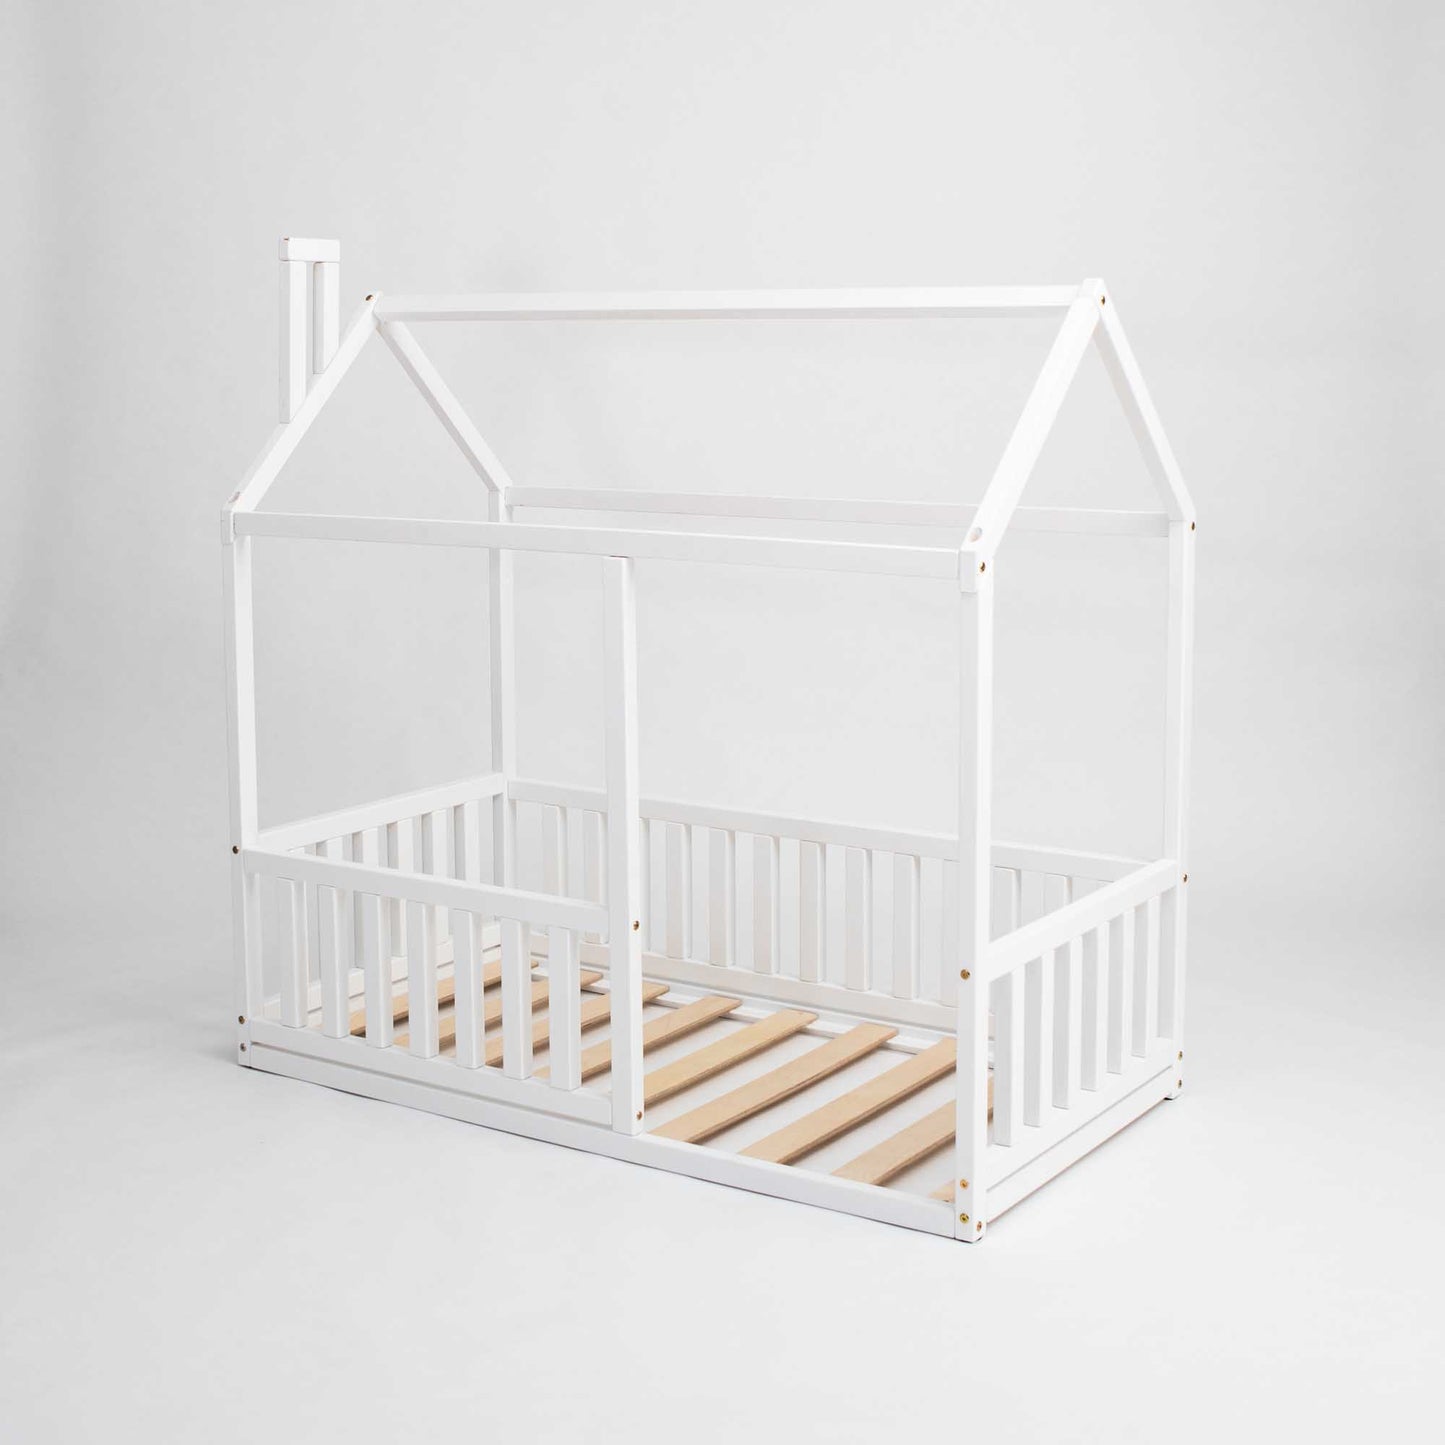 Montessori floor house bed with rails